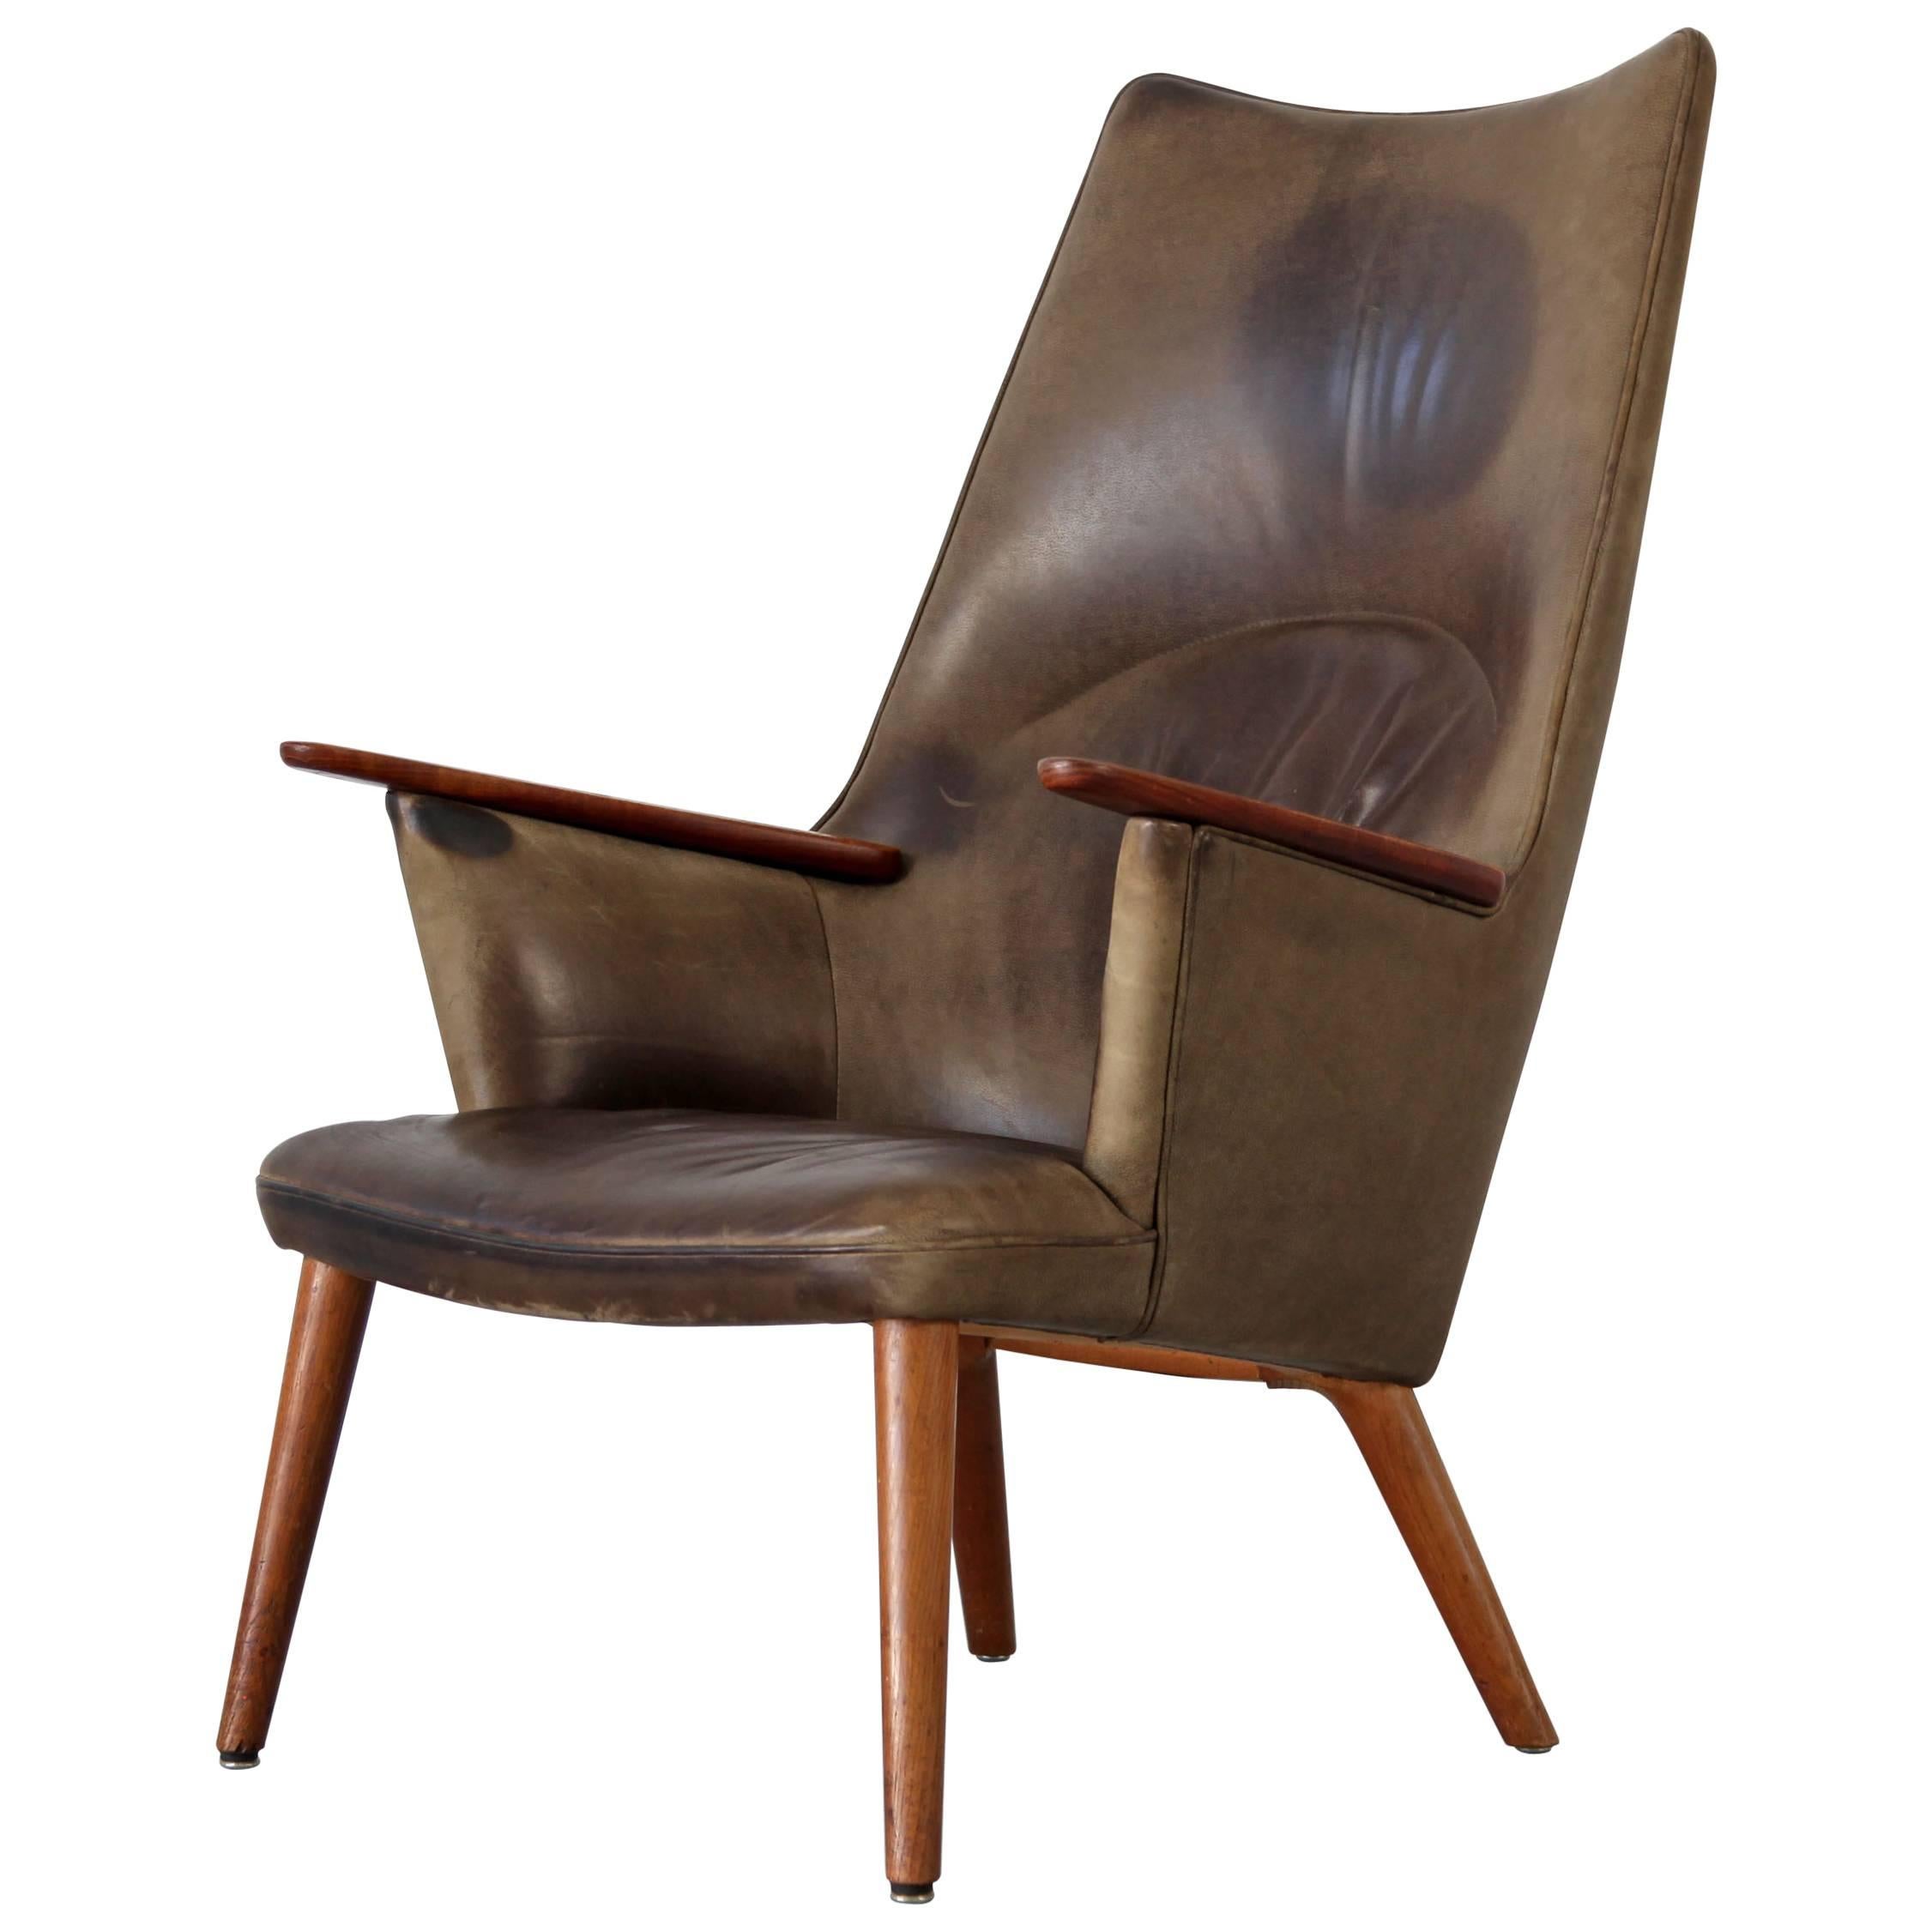 Lounge Chair by Hans J. Wegner, Produced by A.P. Stolen